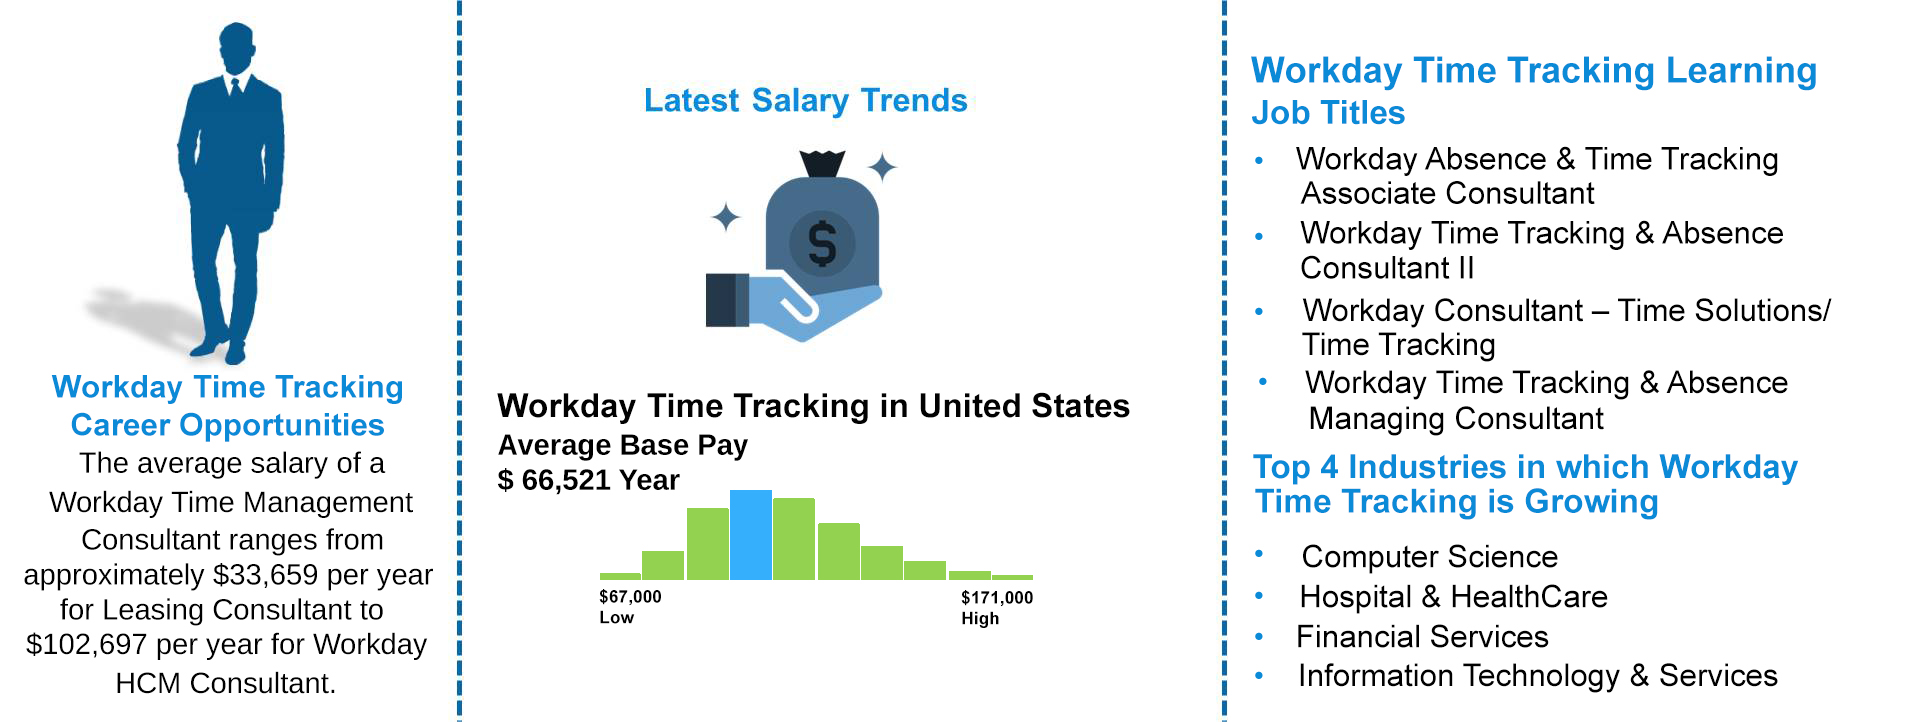 Workday Time Tracking Job Outlook